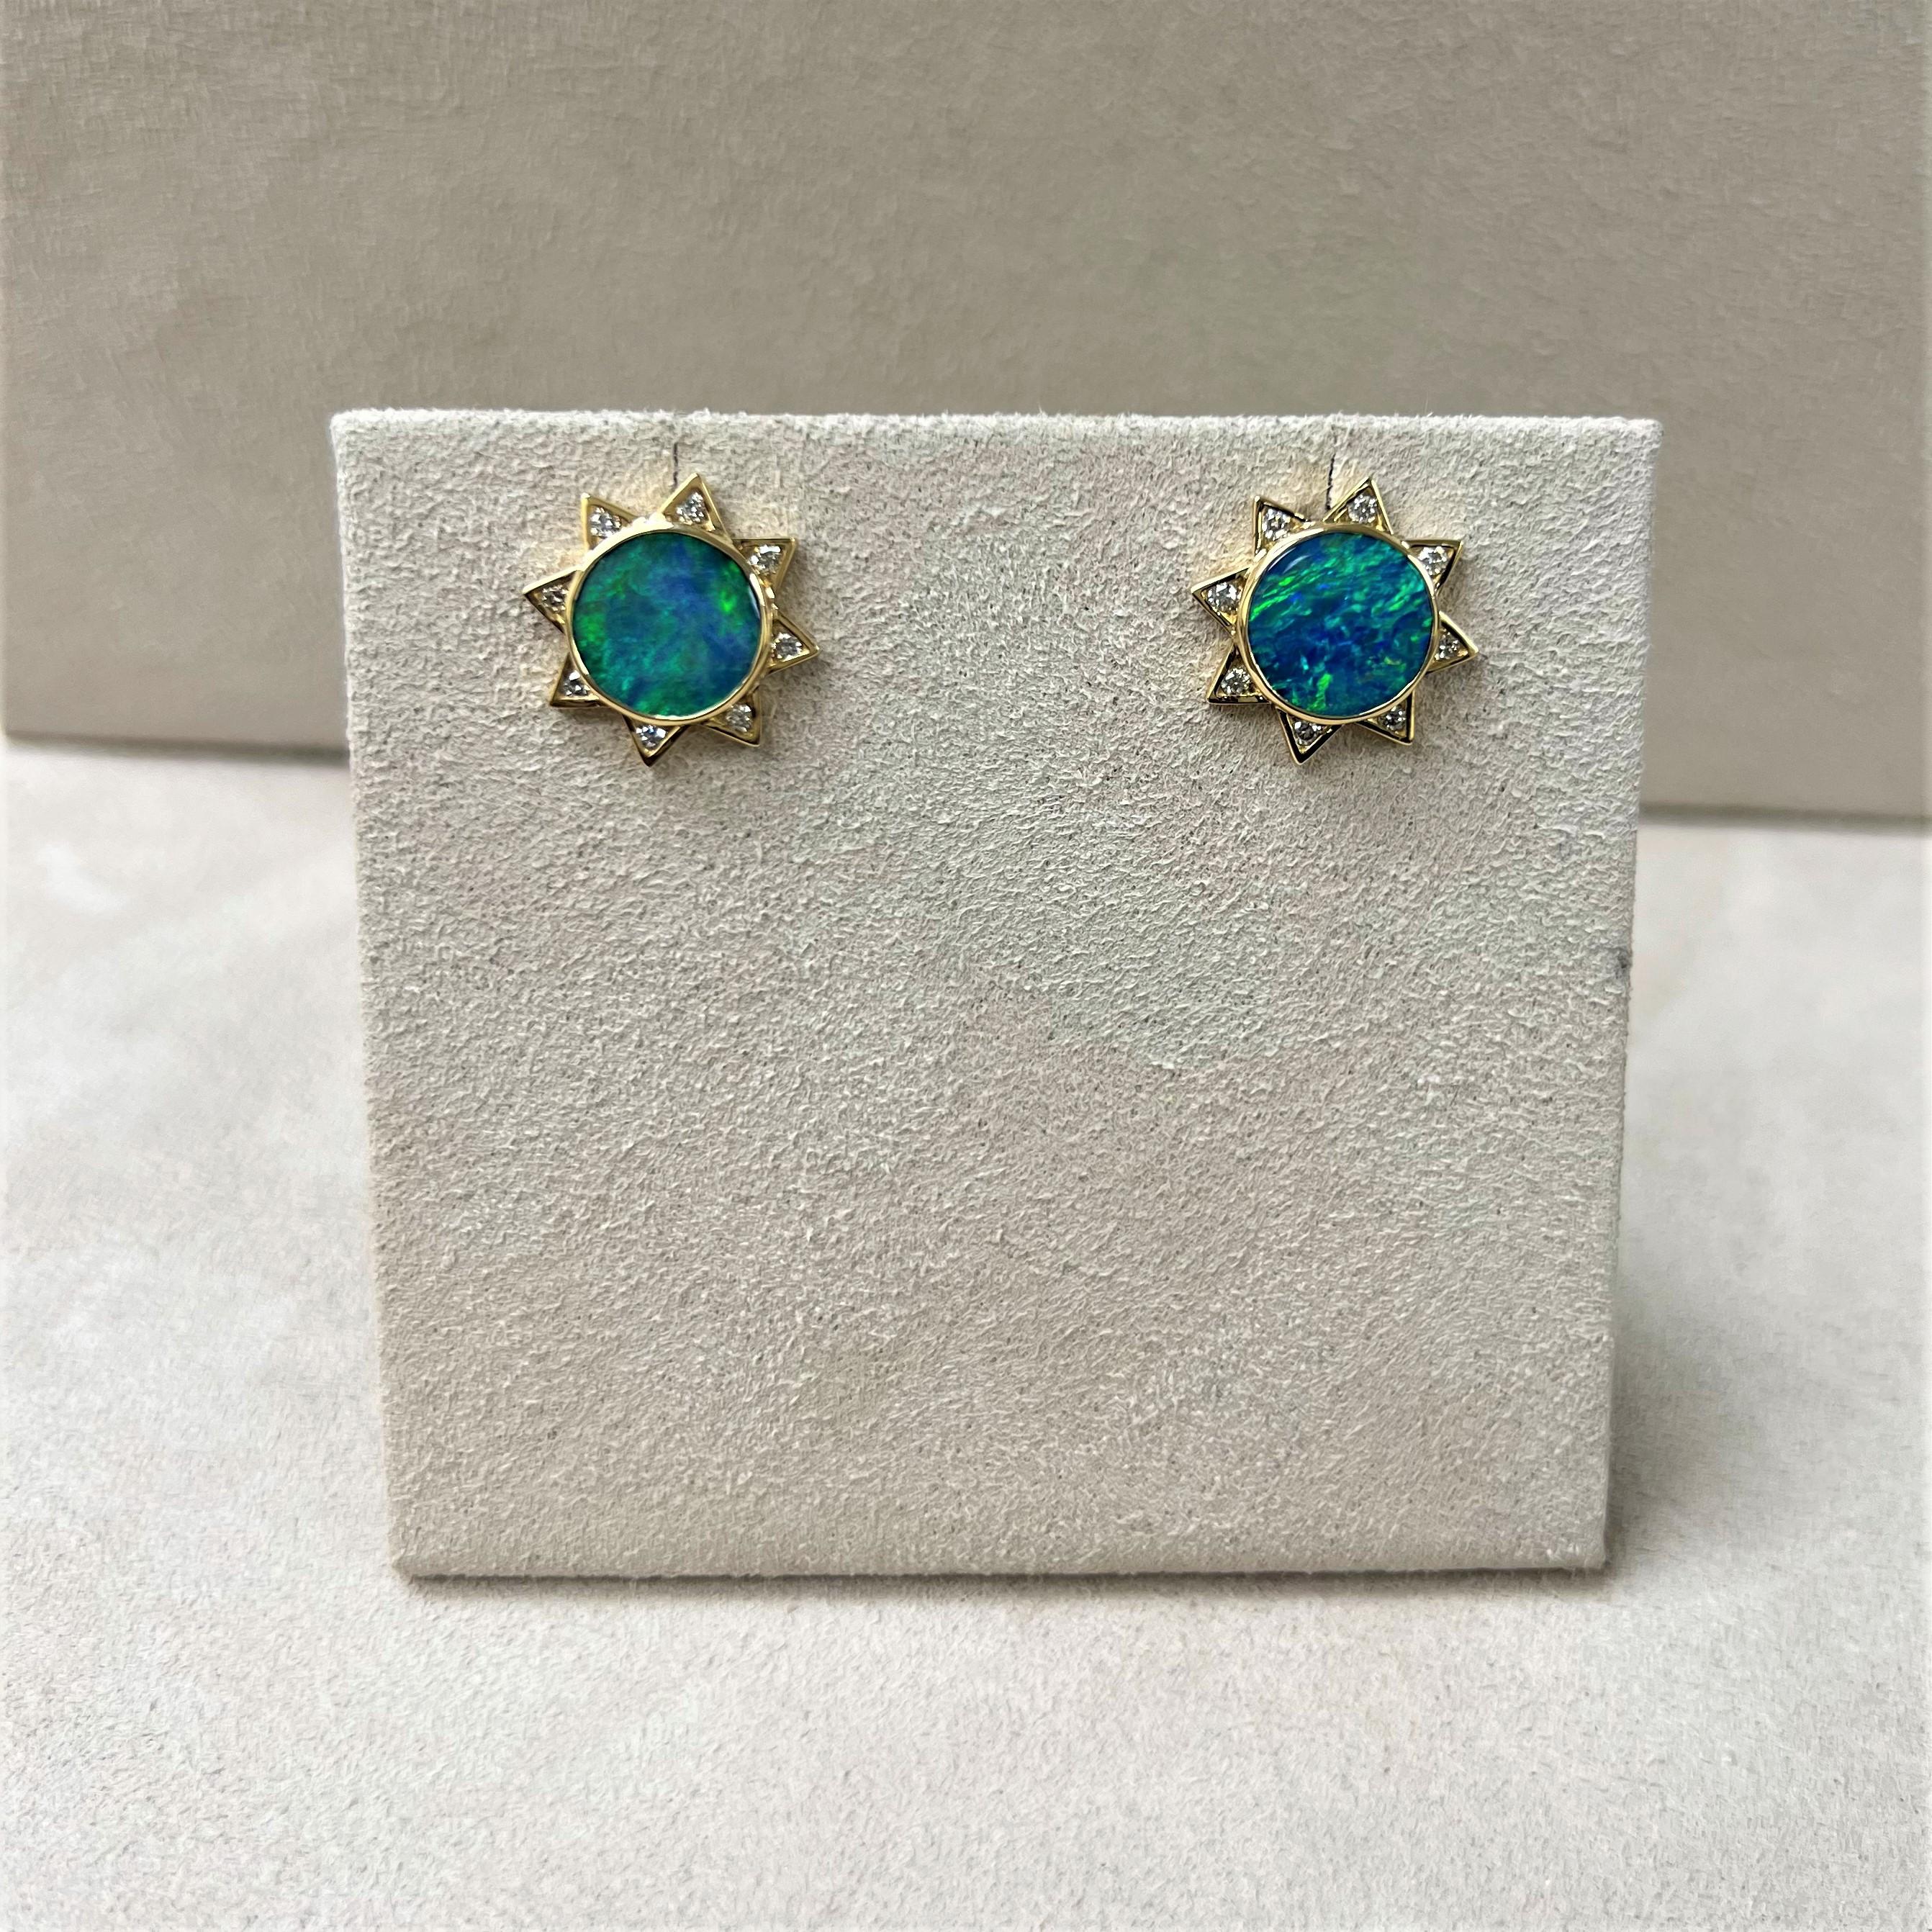 Created in 18 karat yellow gold
Boulder Opal 4.50 carats approx.
Diamonds 0.20 carat approx.
Post backs for pierced ears
Limited Edition



About the Designers

Drawing inspiration from little things, Dharmesh & Namrata Kothari have created an